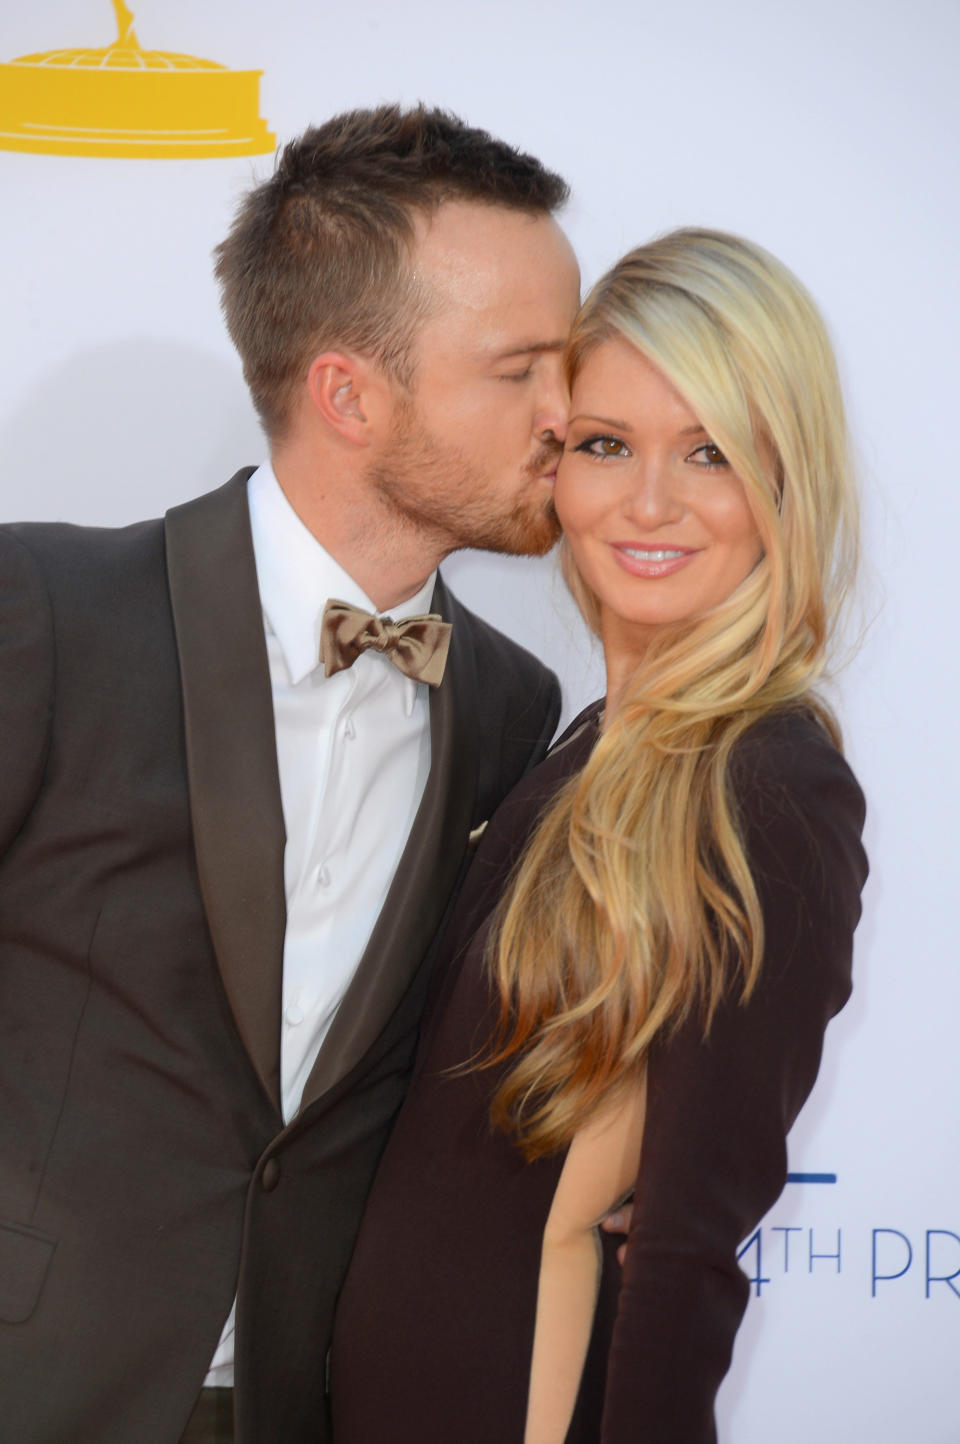 At their shared bachelor-bachelorette party in Las Vegas in May, Paul <a href="http://www.huffingtonpost.com/2013/05/20/aaron-paul-fiancee_n_3307597.html" target="_blank">dished up a cake</a>, designed to look like the <a href="https://twitter.com/aaronpaul_8/status/256466339722579968" target="_blank">Paris street</a> where he proposed in 2011, decorated with the words, "My pretty bird, thank you for loving me."